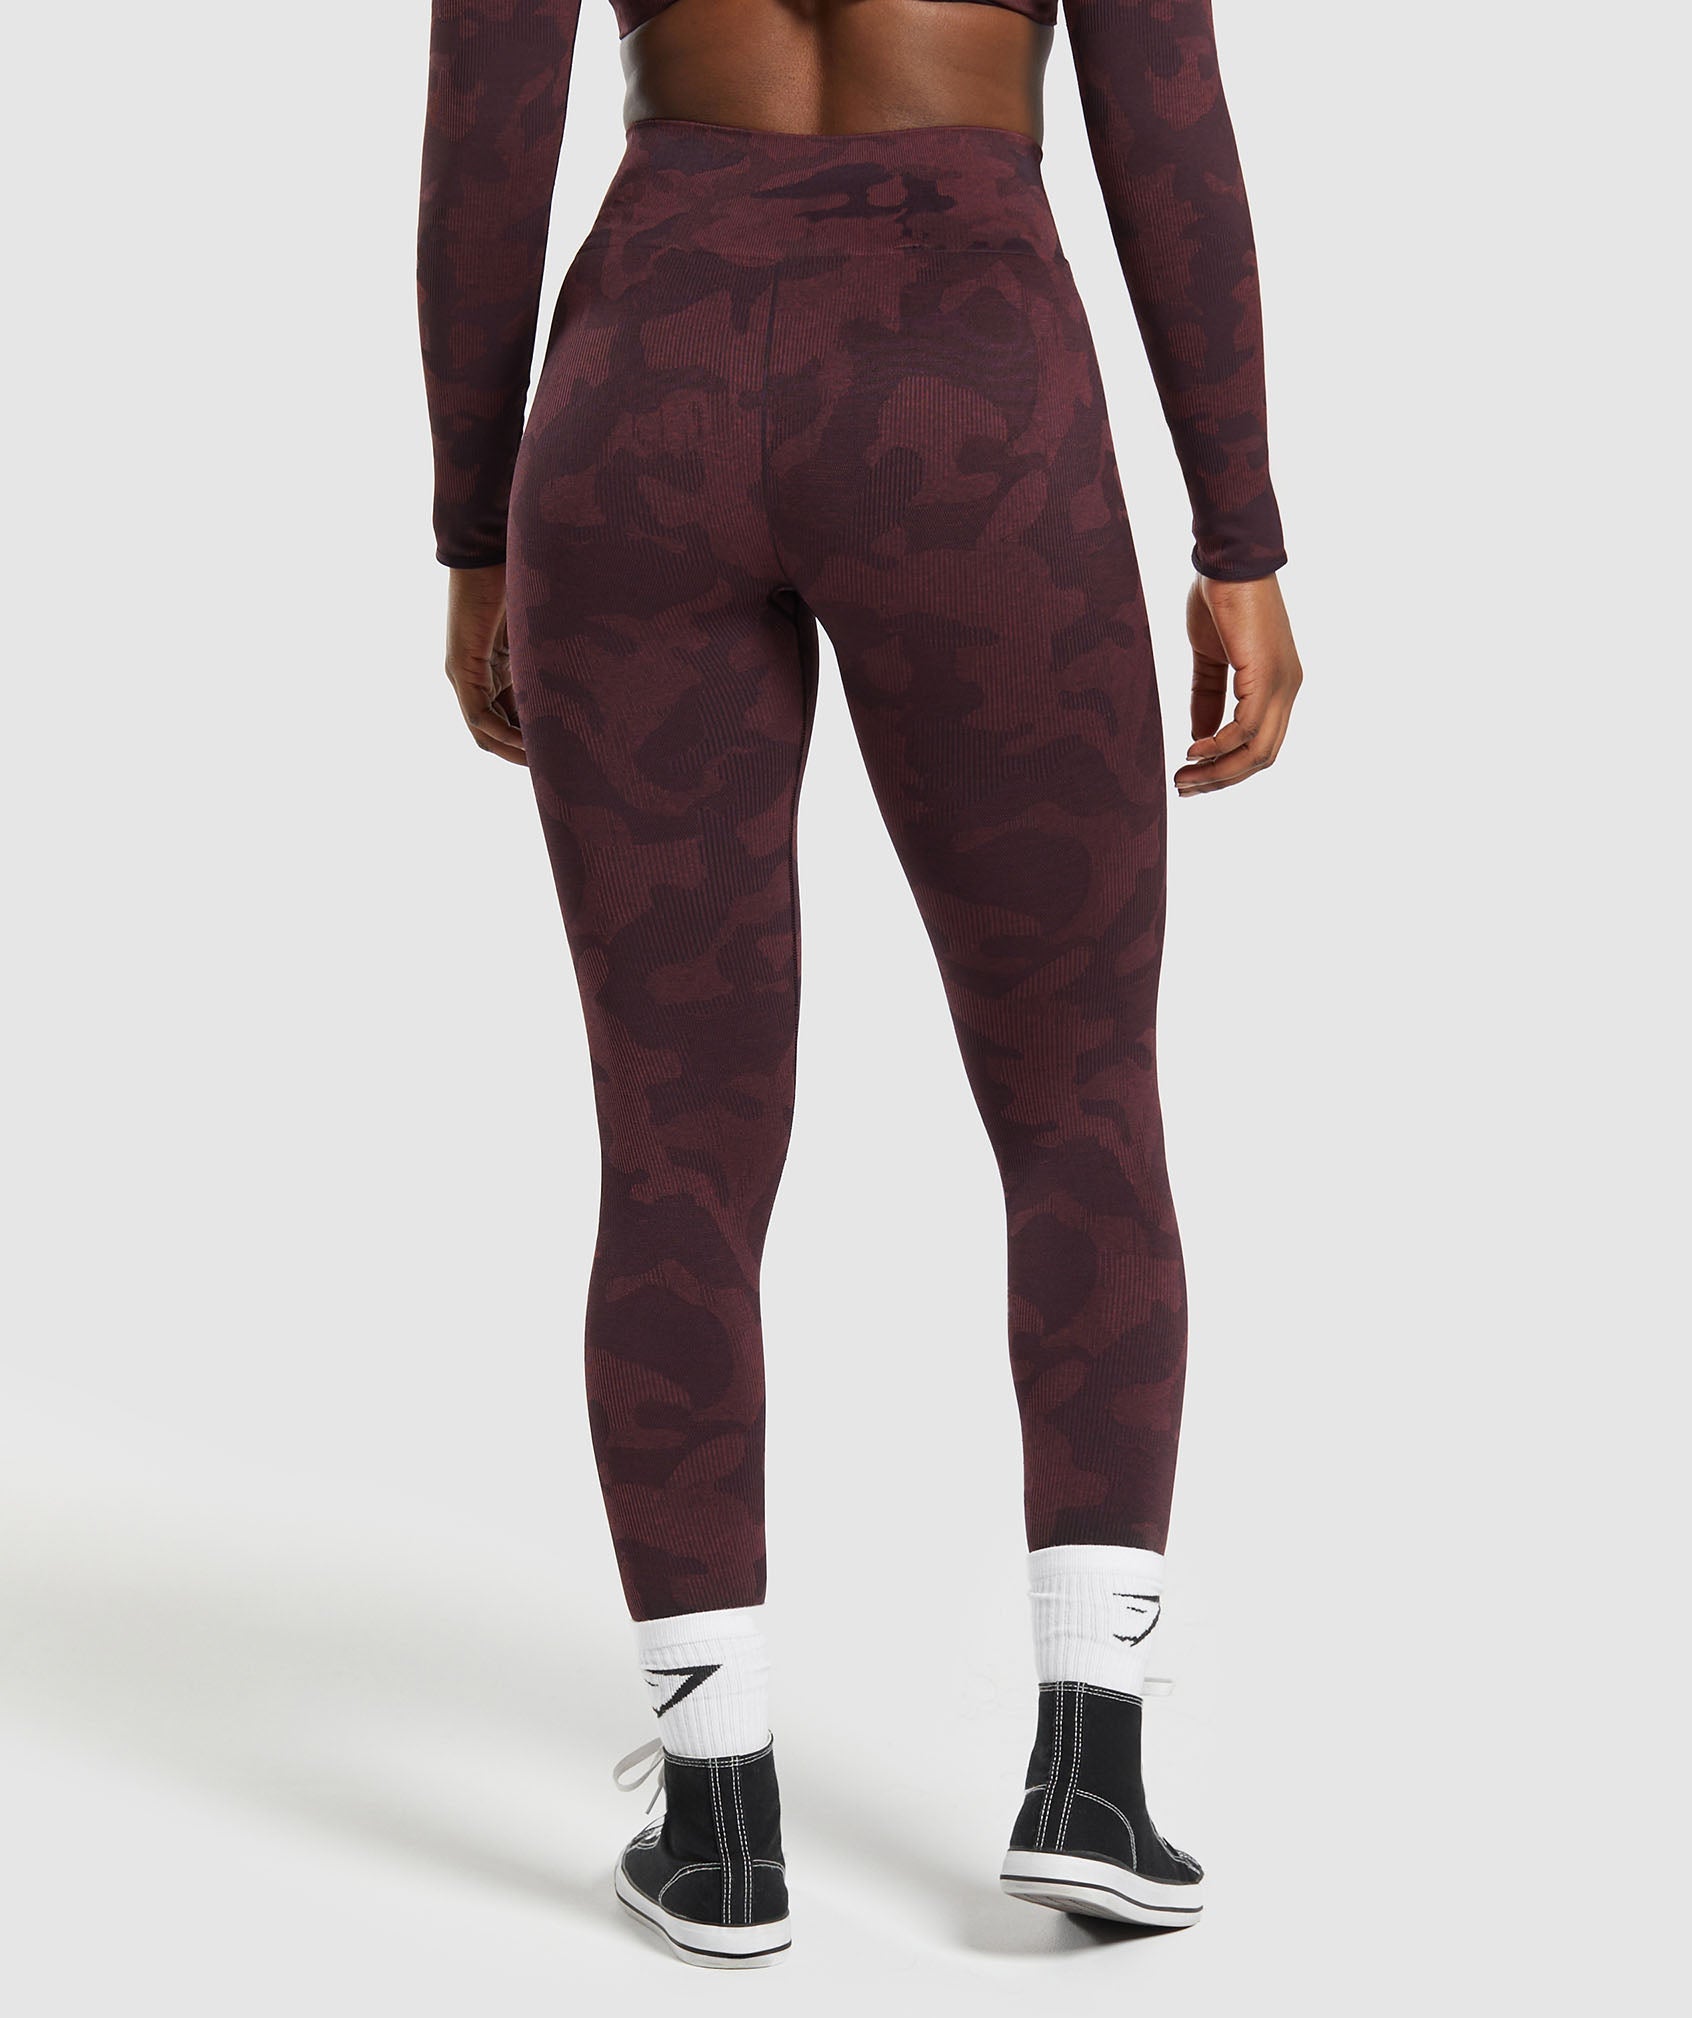 Sporty Camo Ankle Length Running Leggings With Pockets With Dual Pockets  For Women Loose Fit, Stretchy, And Active From Long01, $23.1